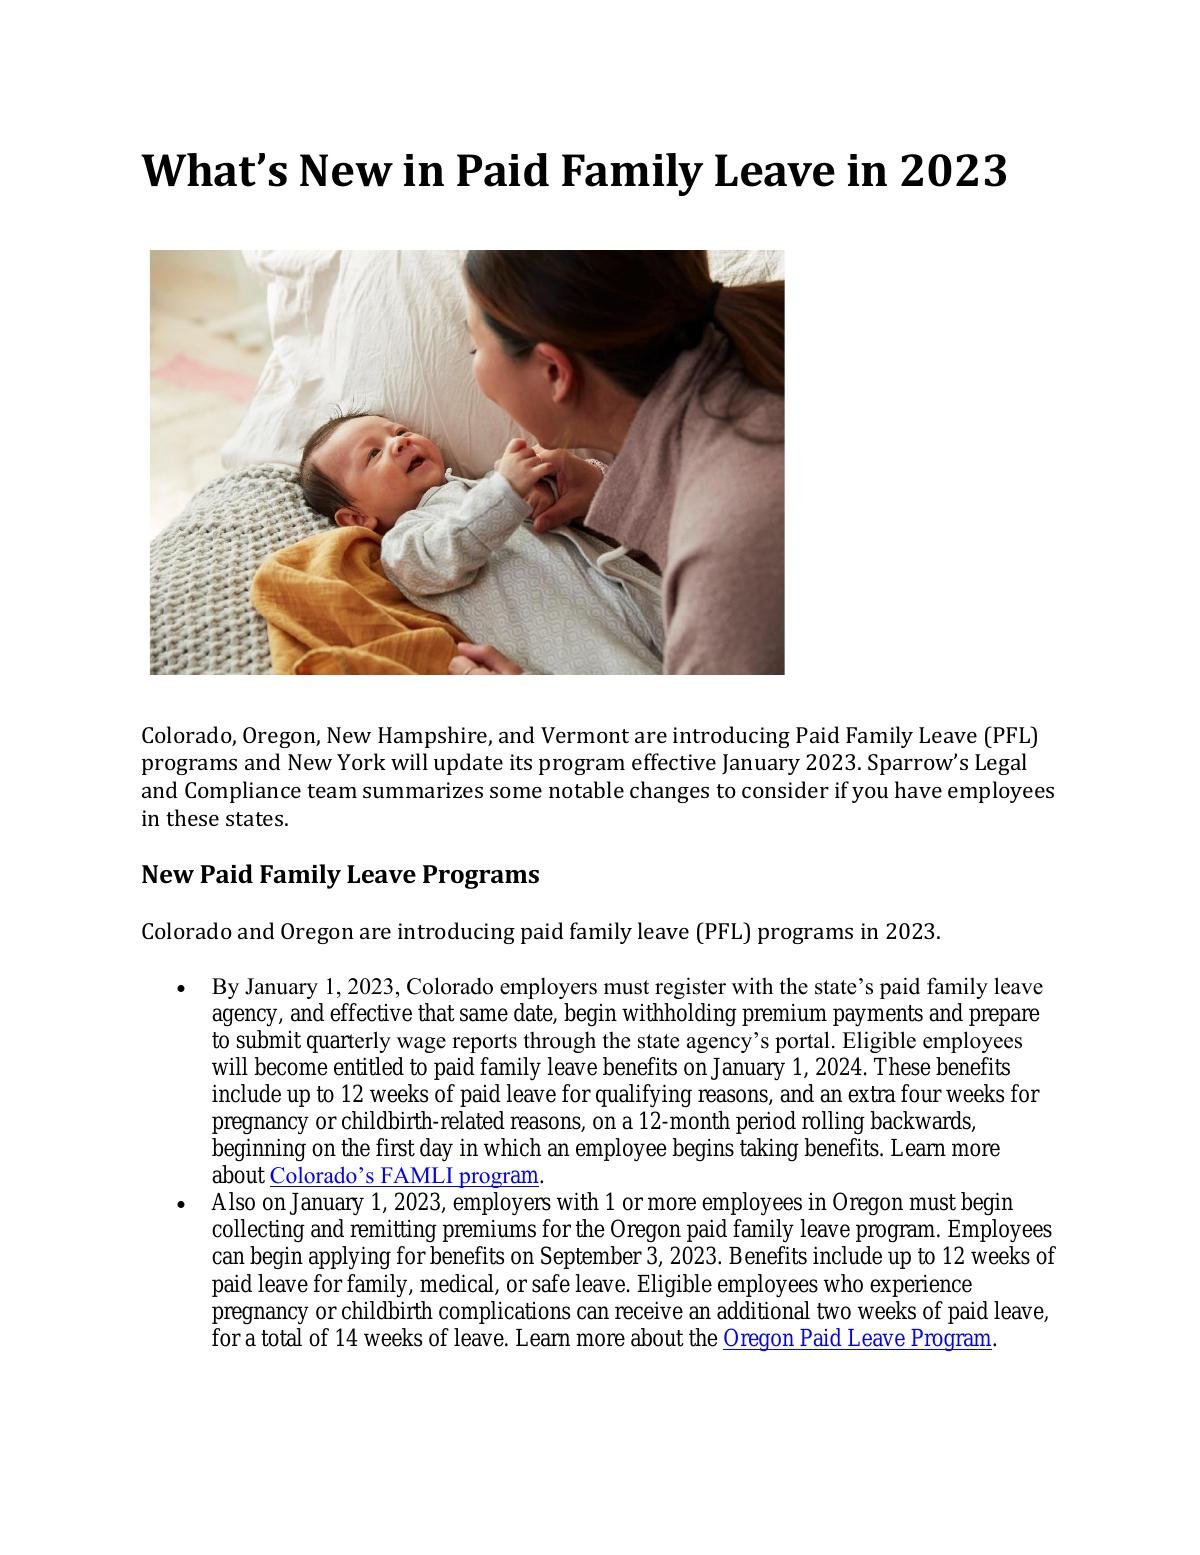 What’s New in Paid Family Leave in 2023